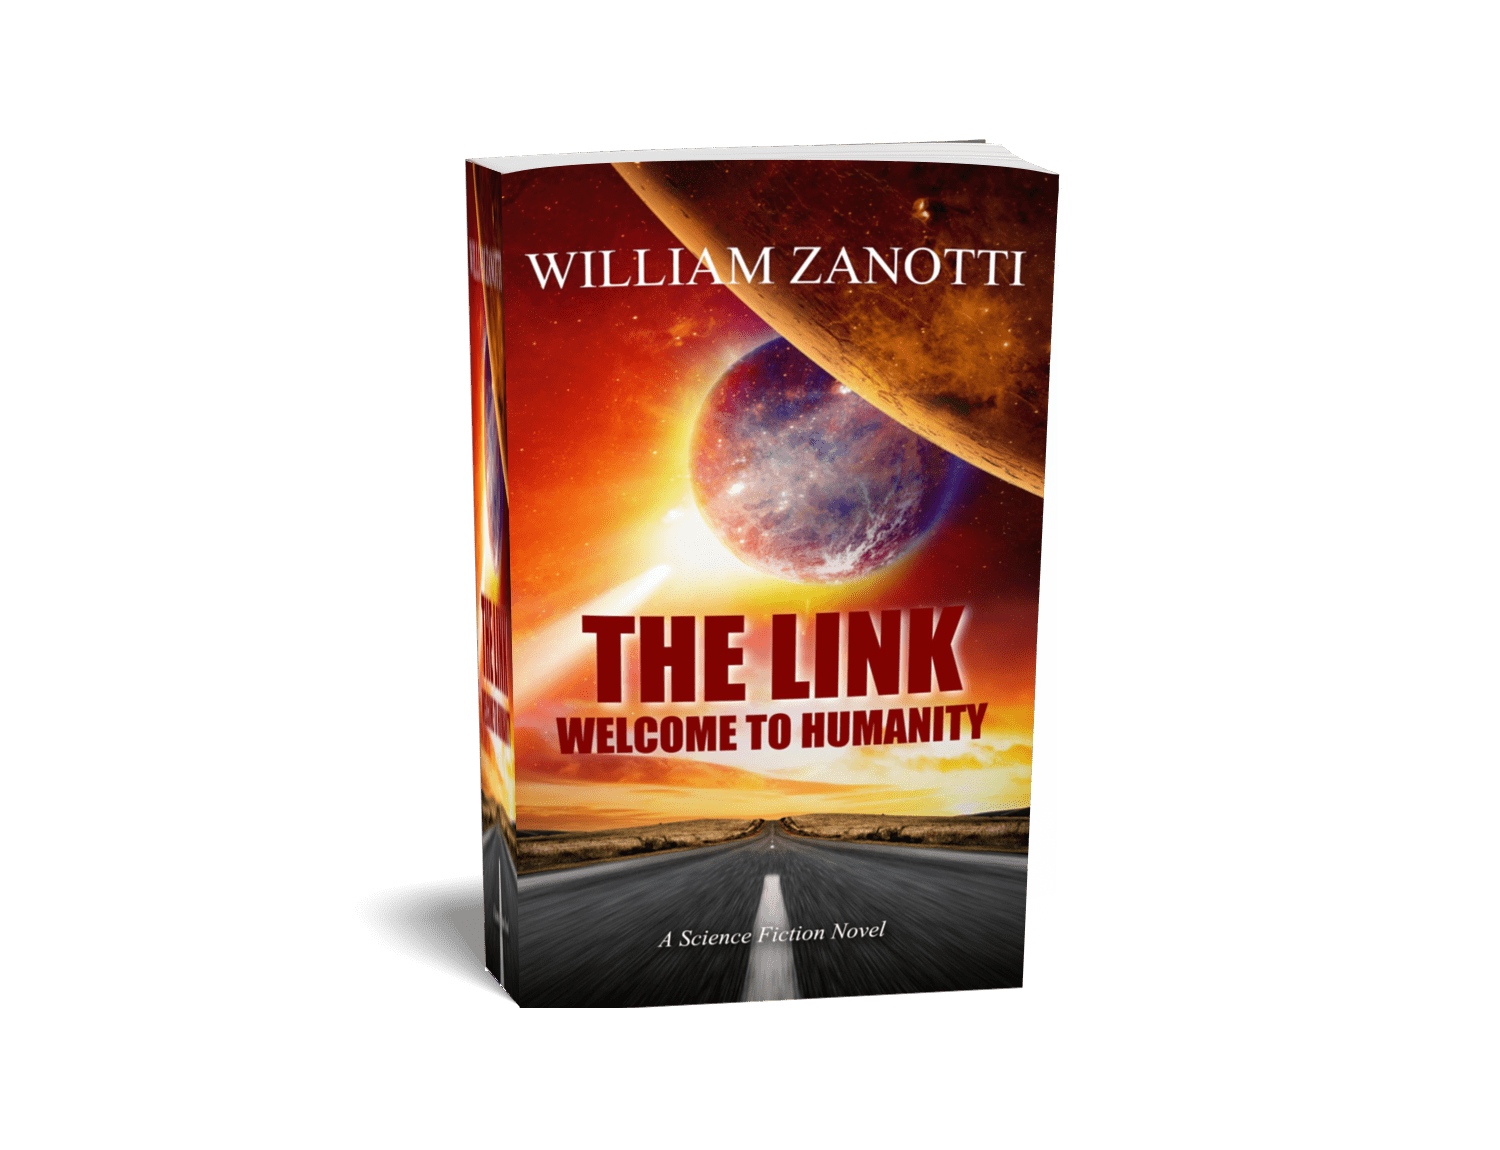 The Link: Wecome to Humanity, widely available.